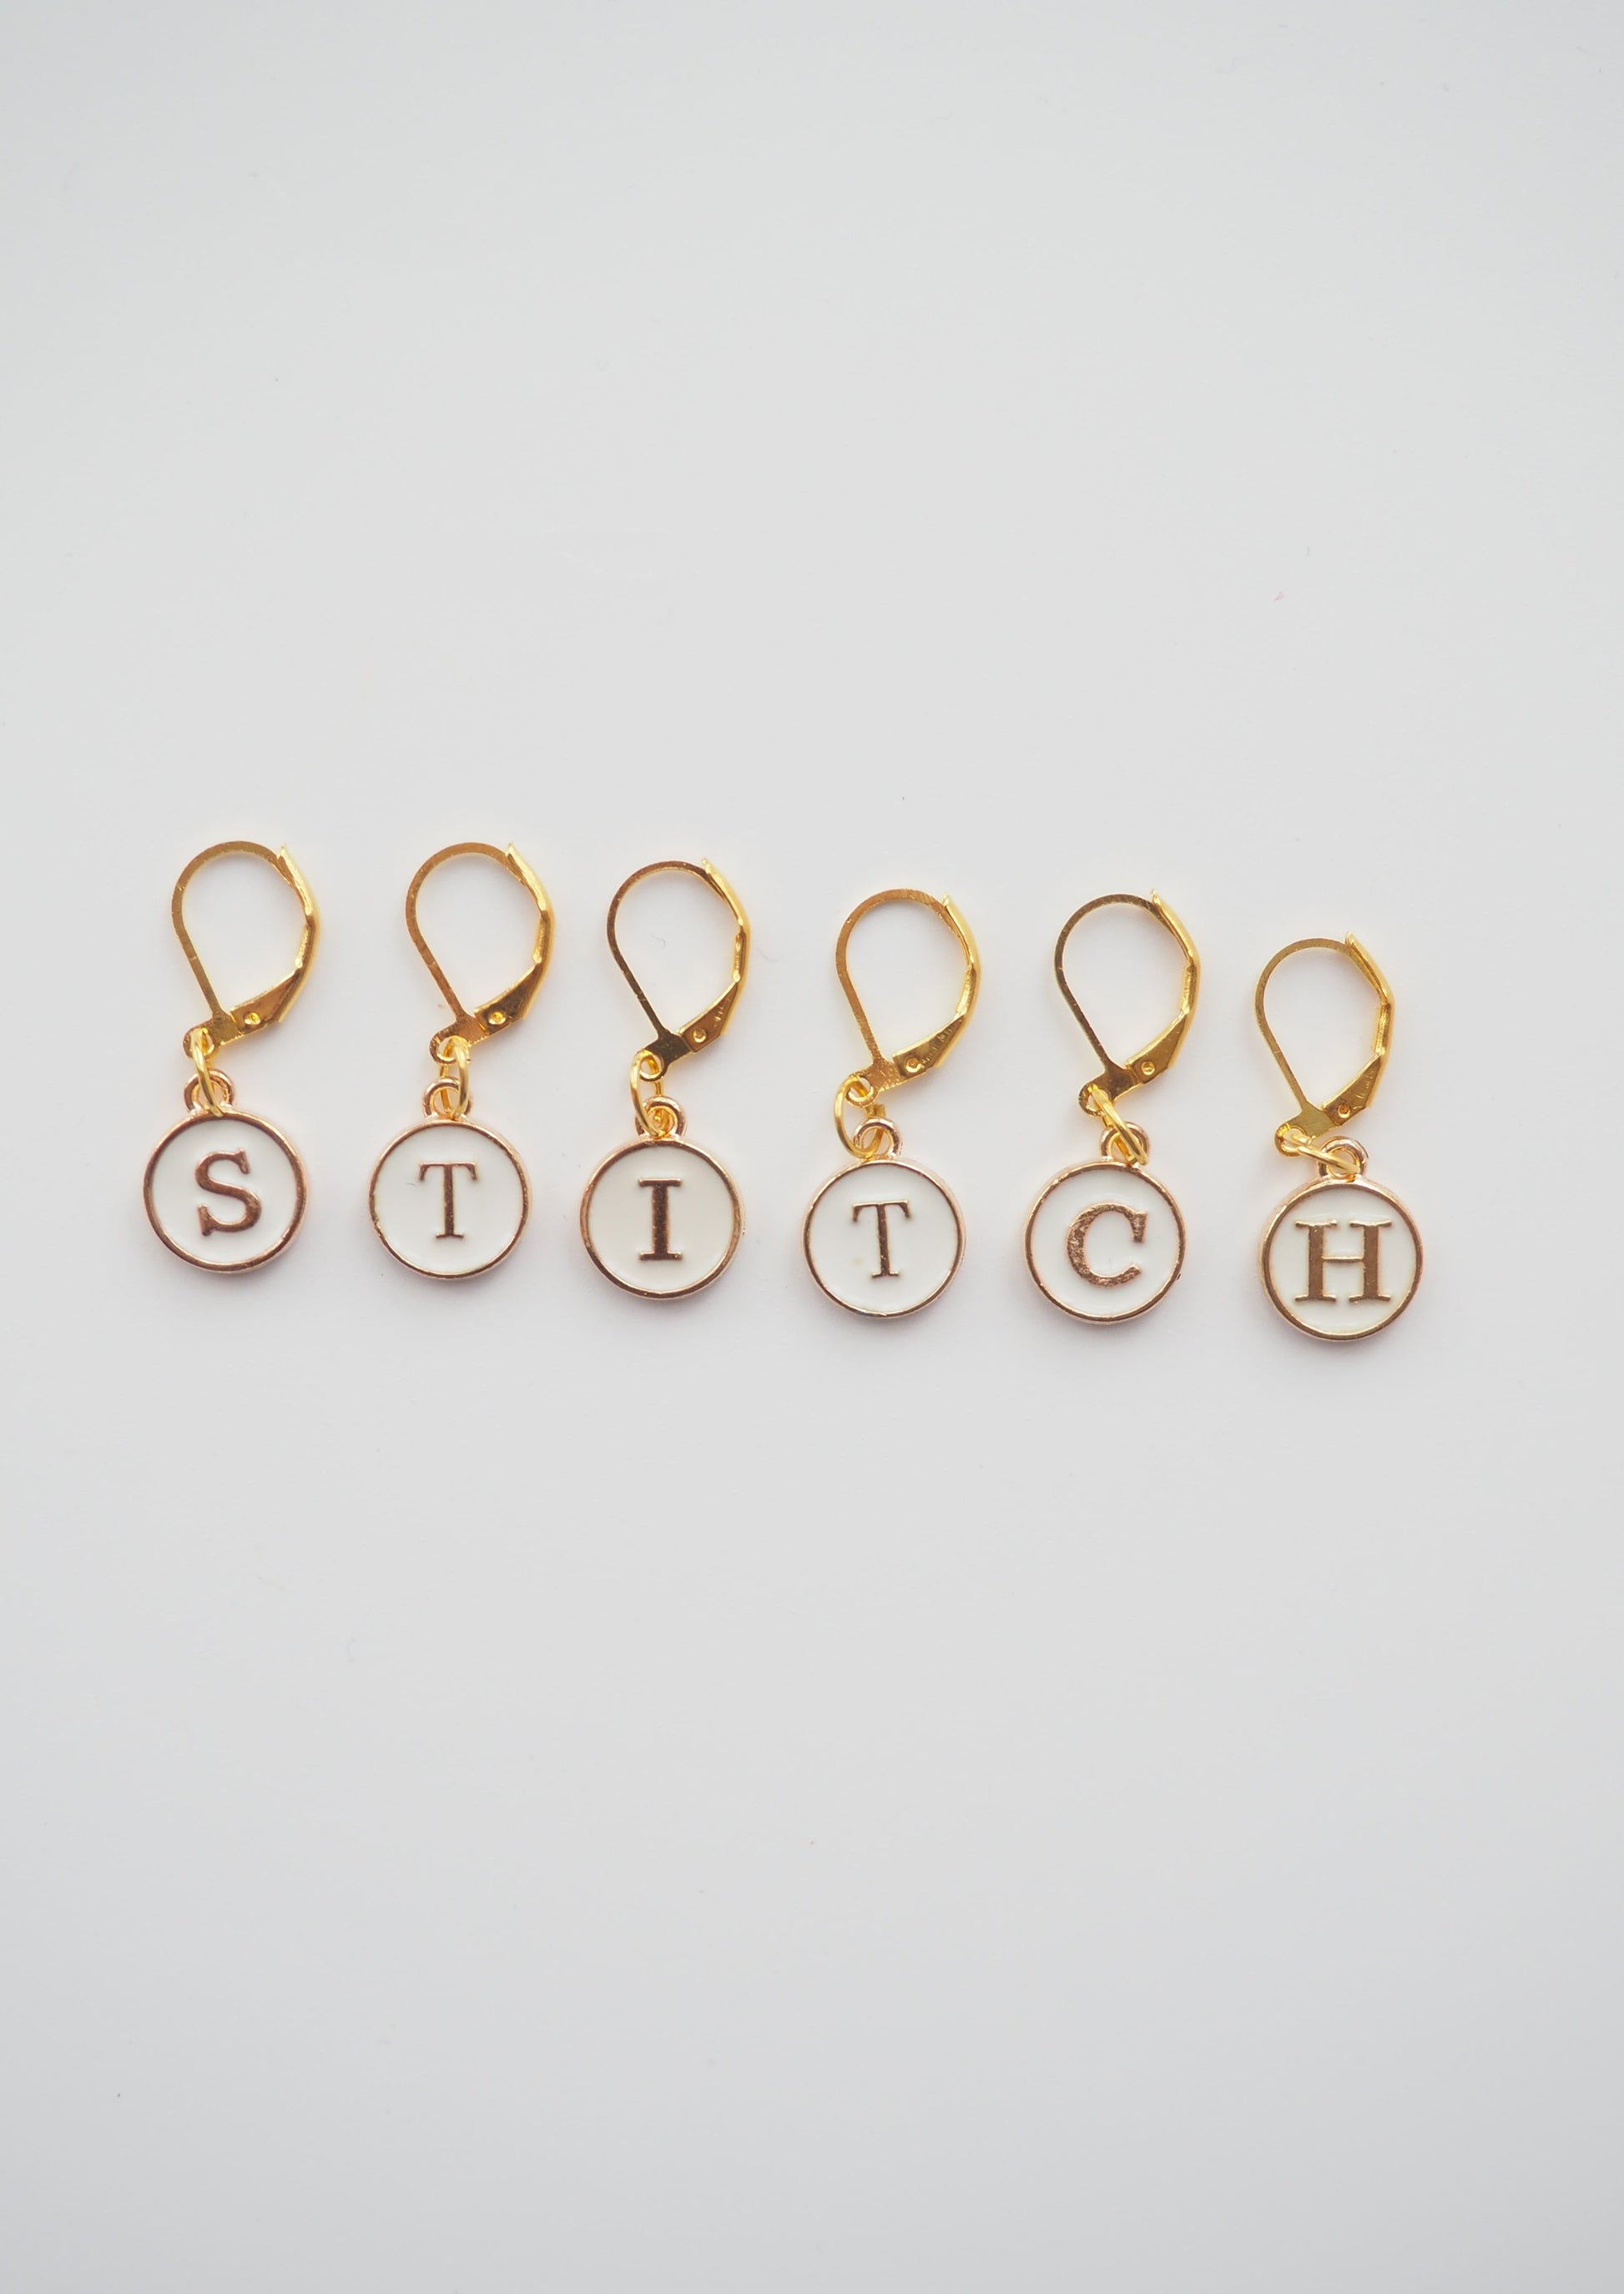 image of 6 white enamel stitch markers with gold colour metal. claw clasps which can be used for knitting or crochet. the markers spell out the word "stitch"